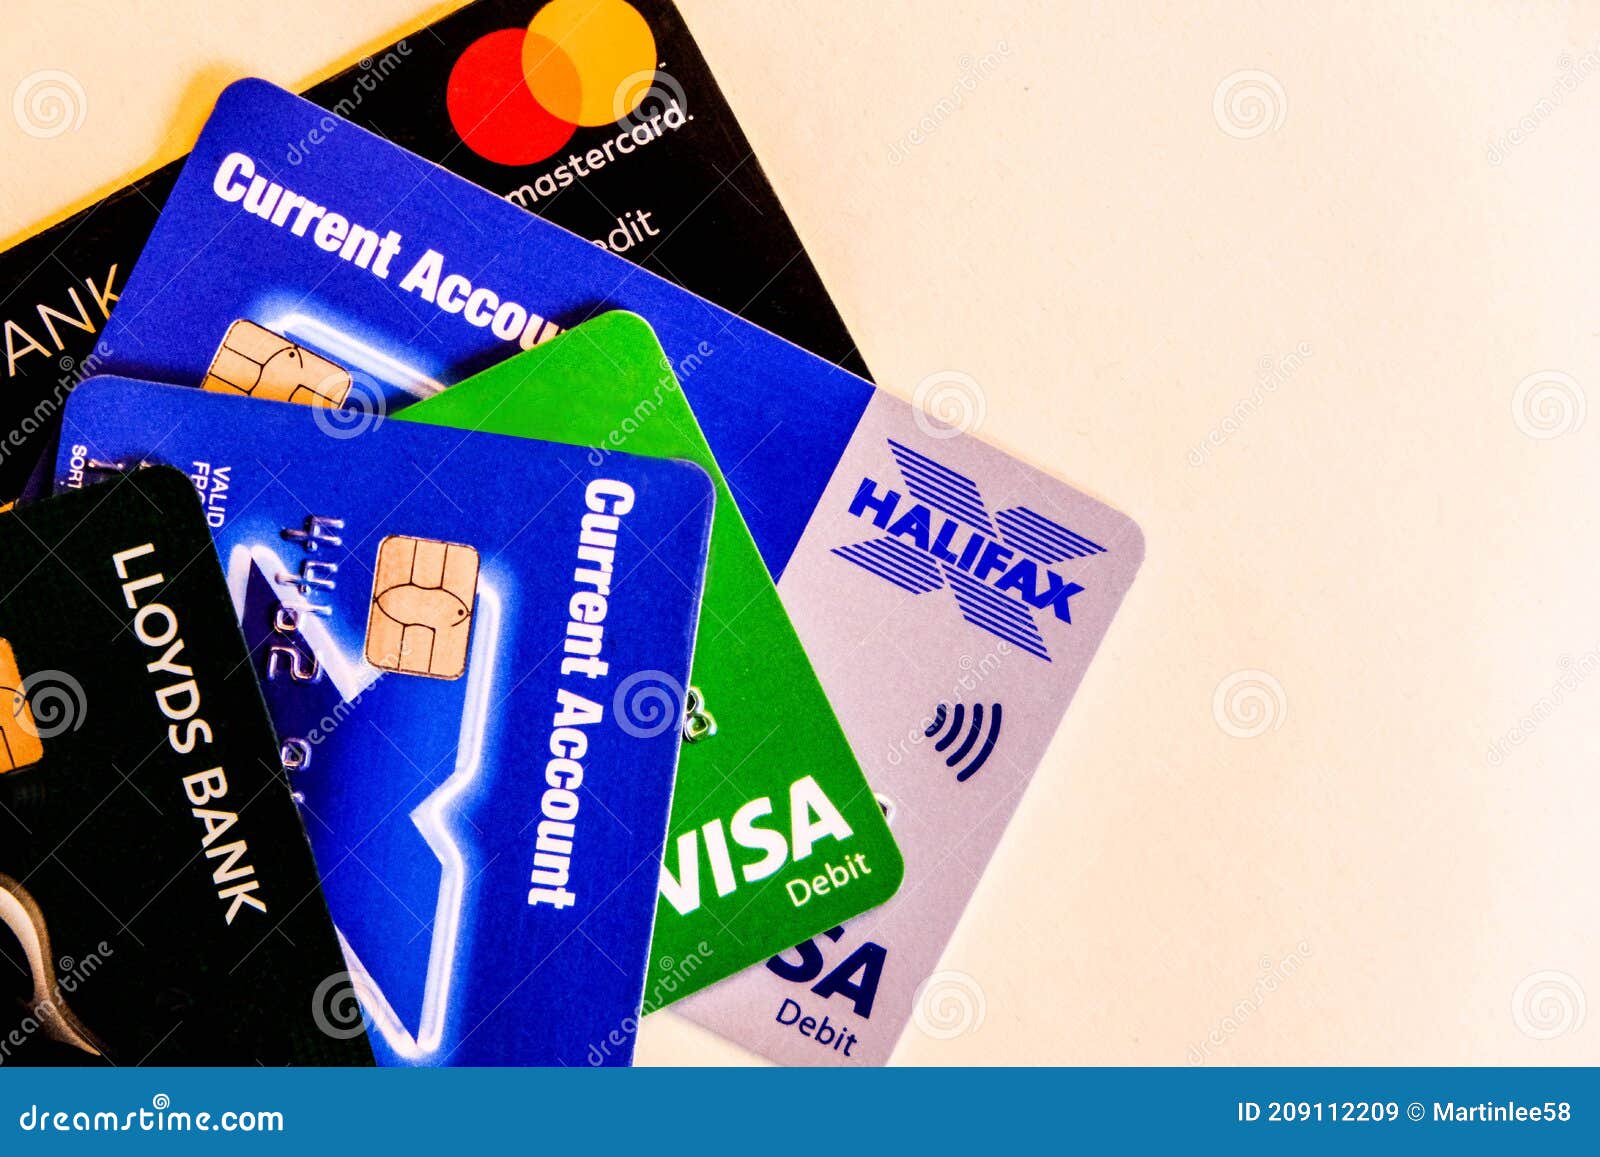 london uk january selection bank debit credit cards no people as people use credit times financial hardship 209112209